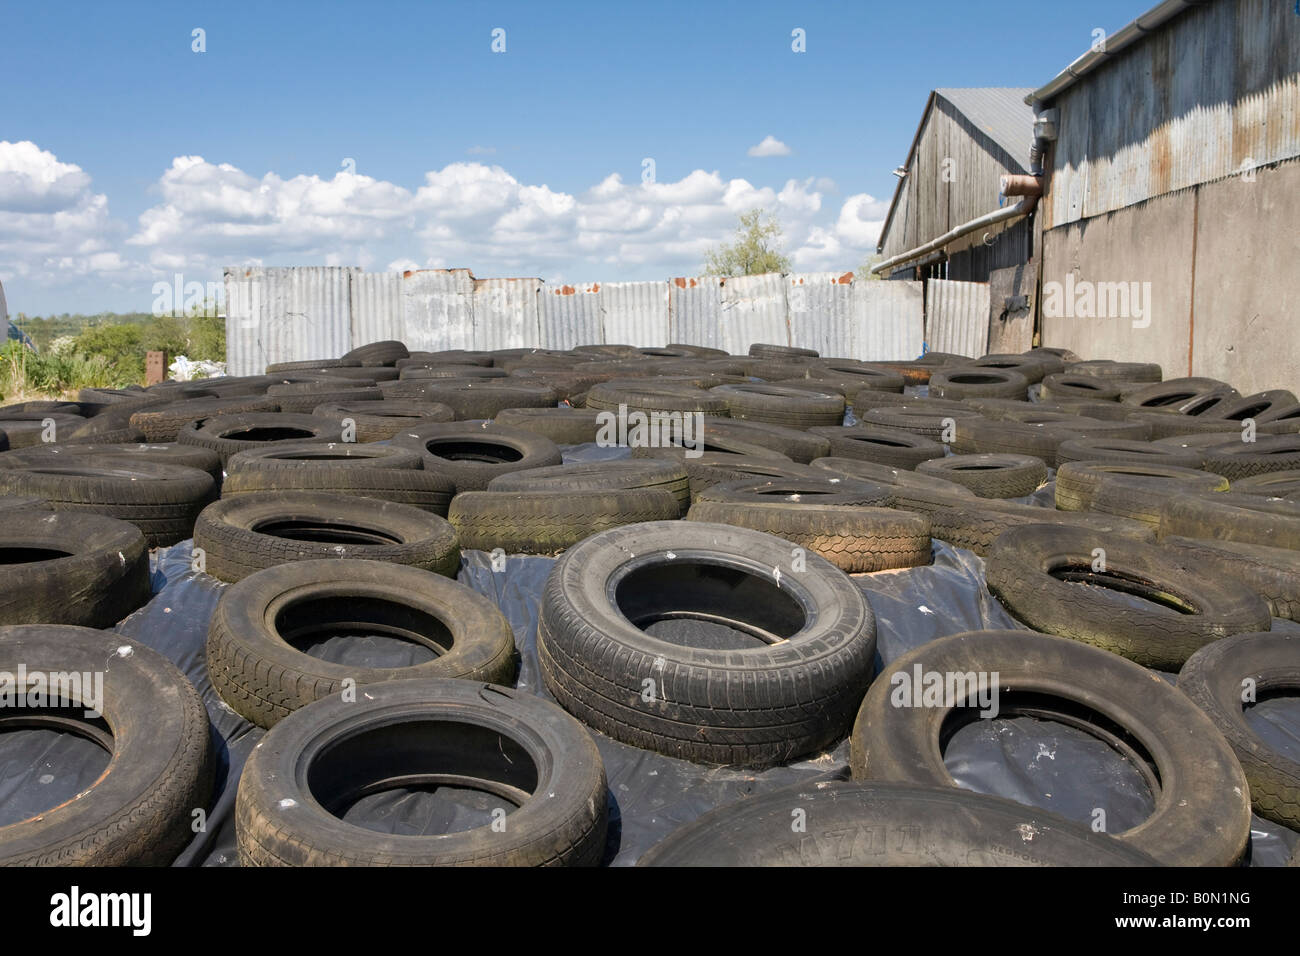 Tyres holding down polythene sheet on a silage pit on a small farm Stock Photo